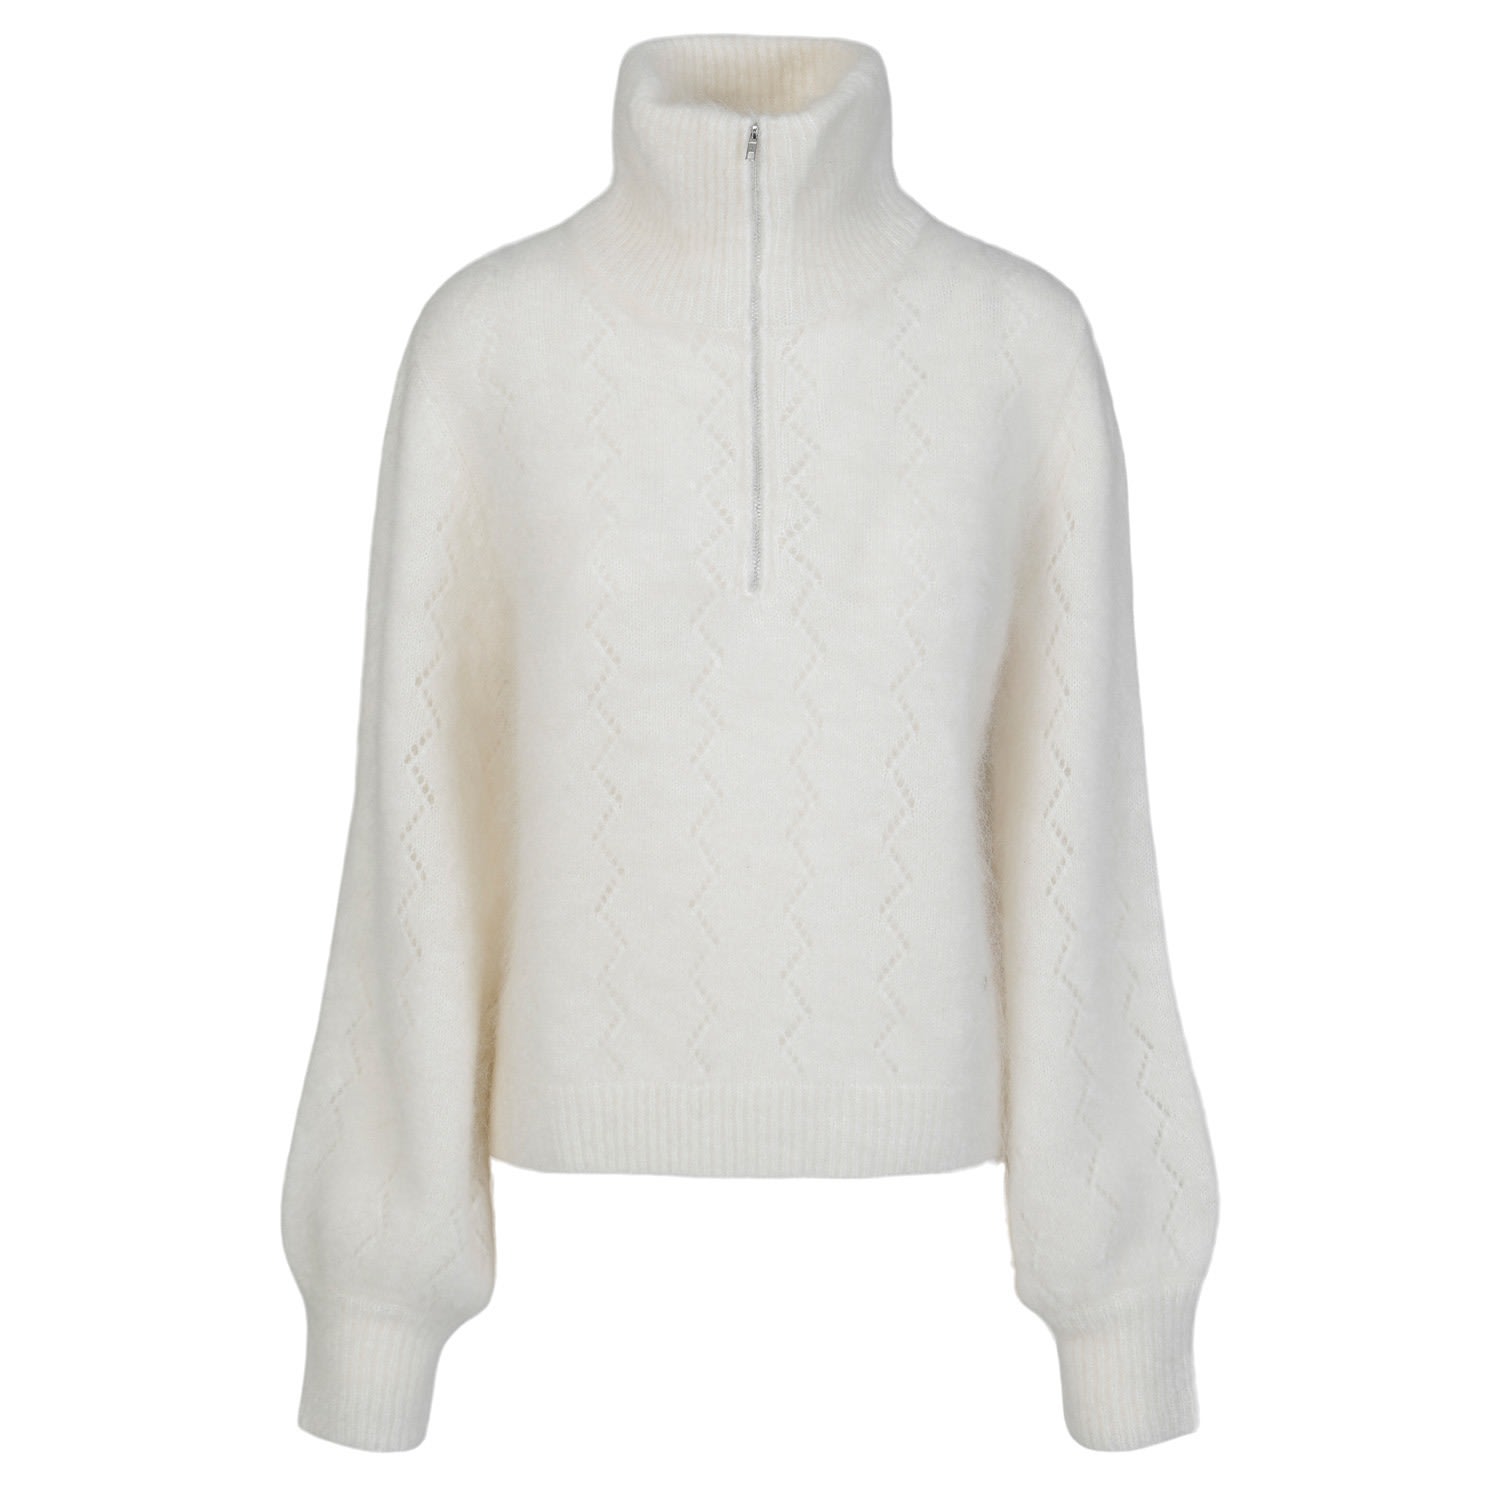 Women’s "Mille" Fluffy Mohair Pullover - White Extra Small Tirillm